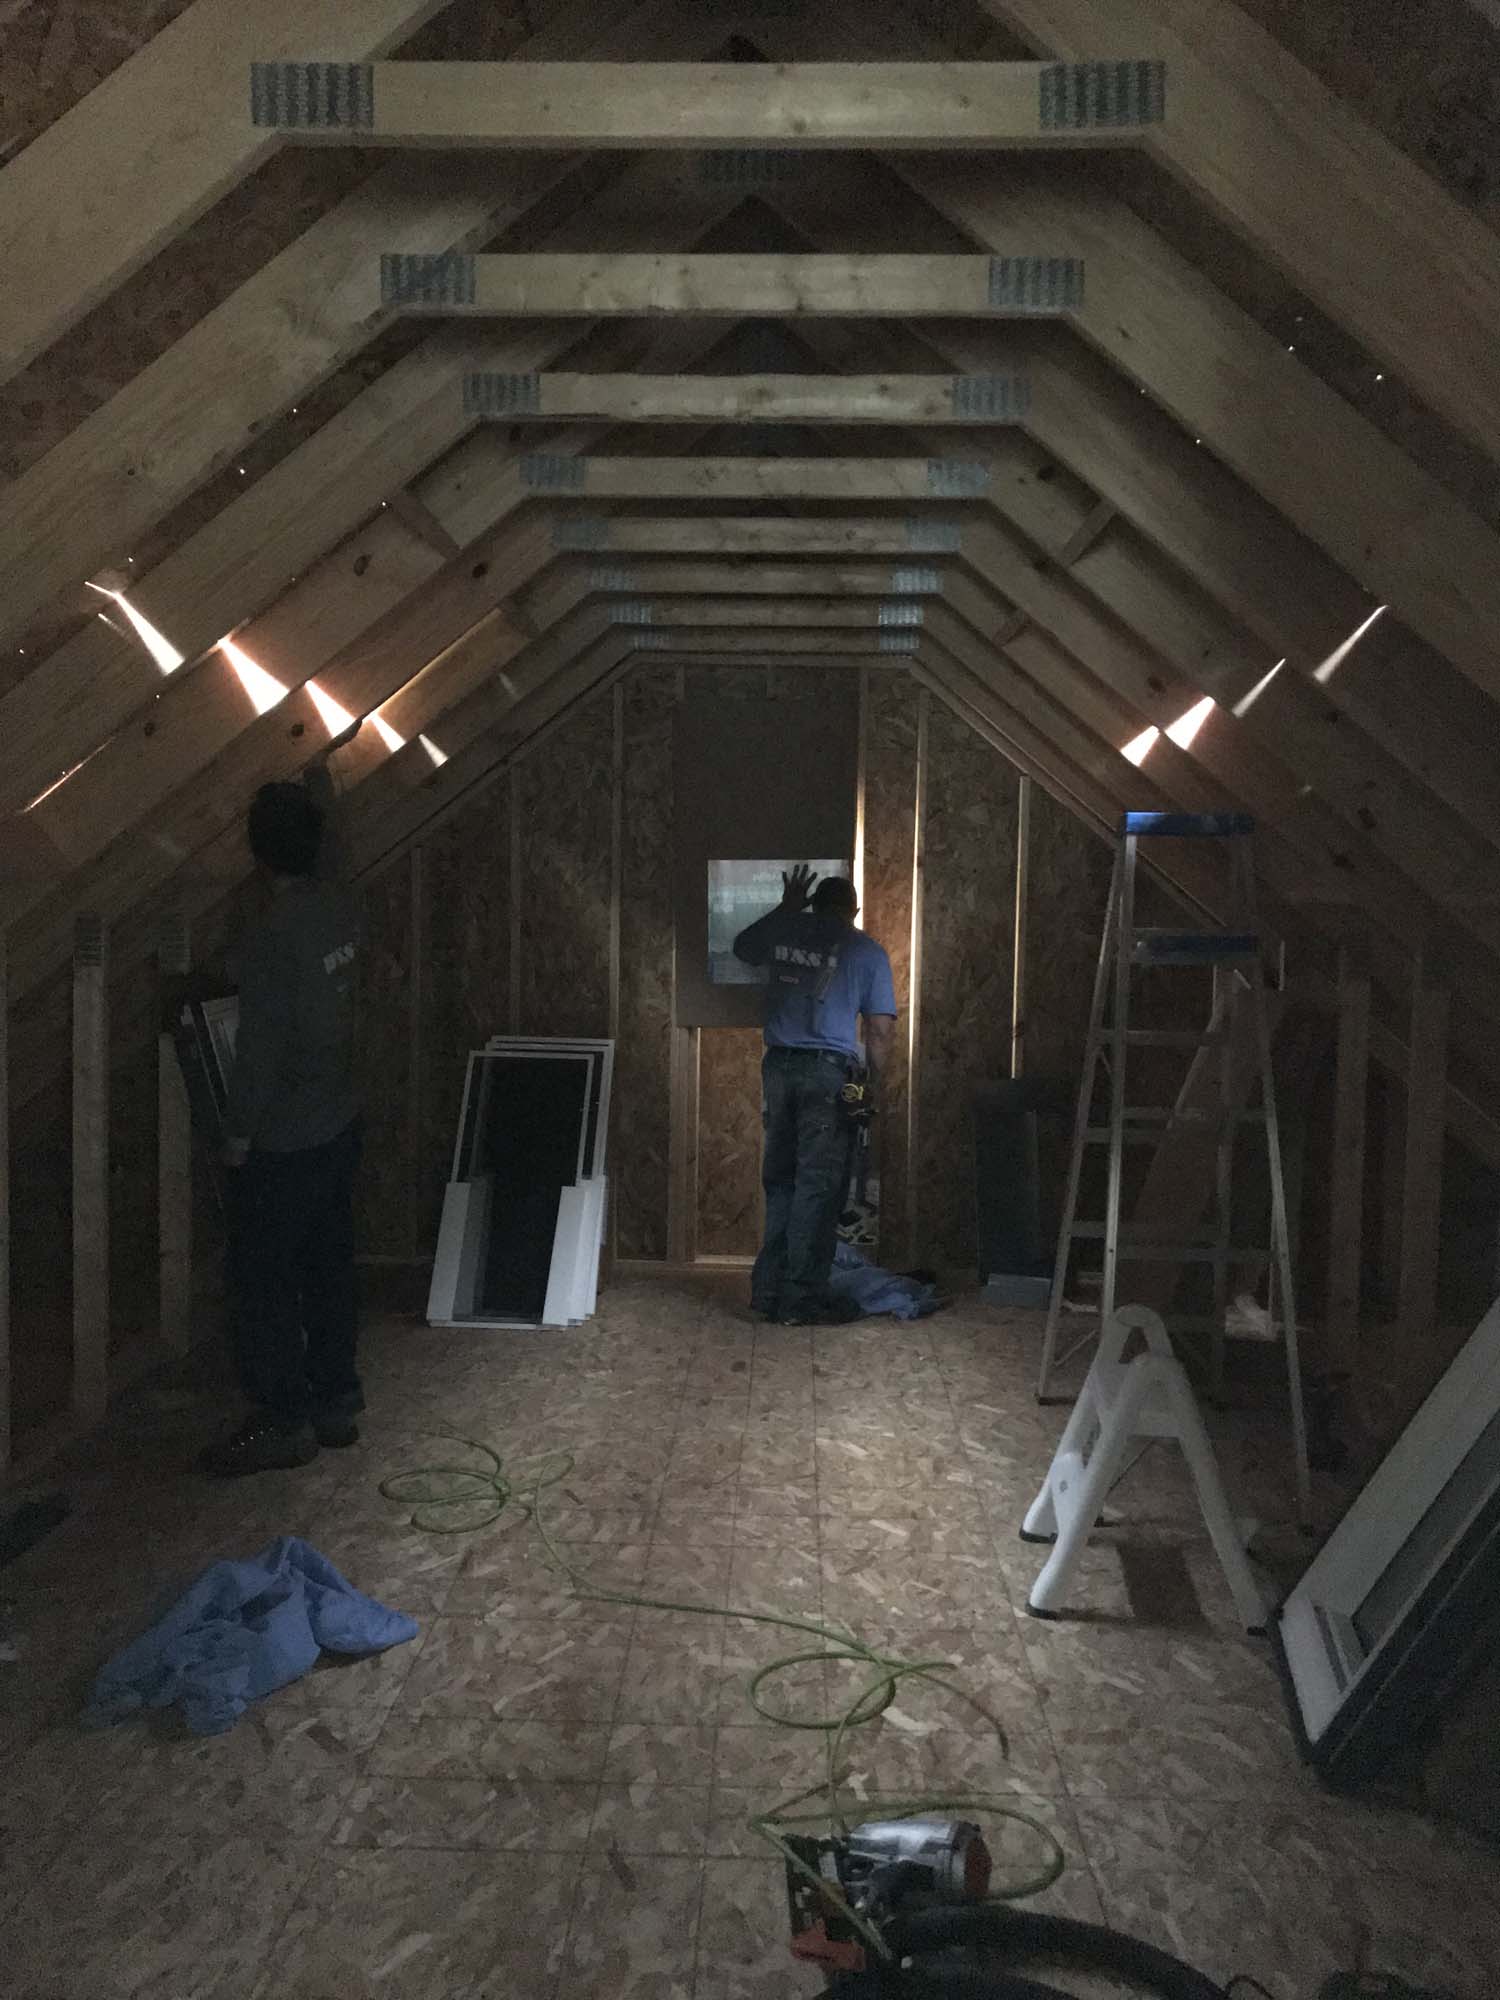 Workers install two large square skylights in an A-frame attic space